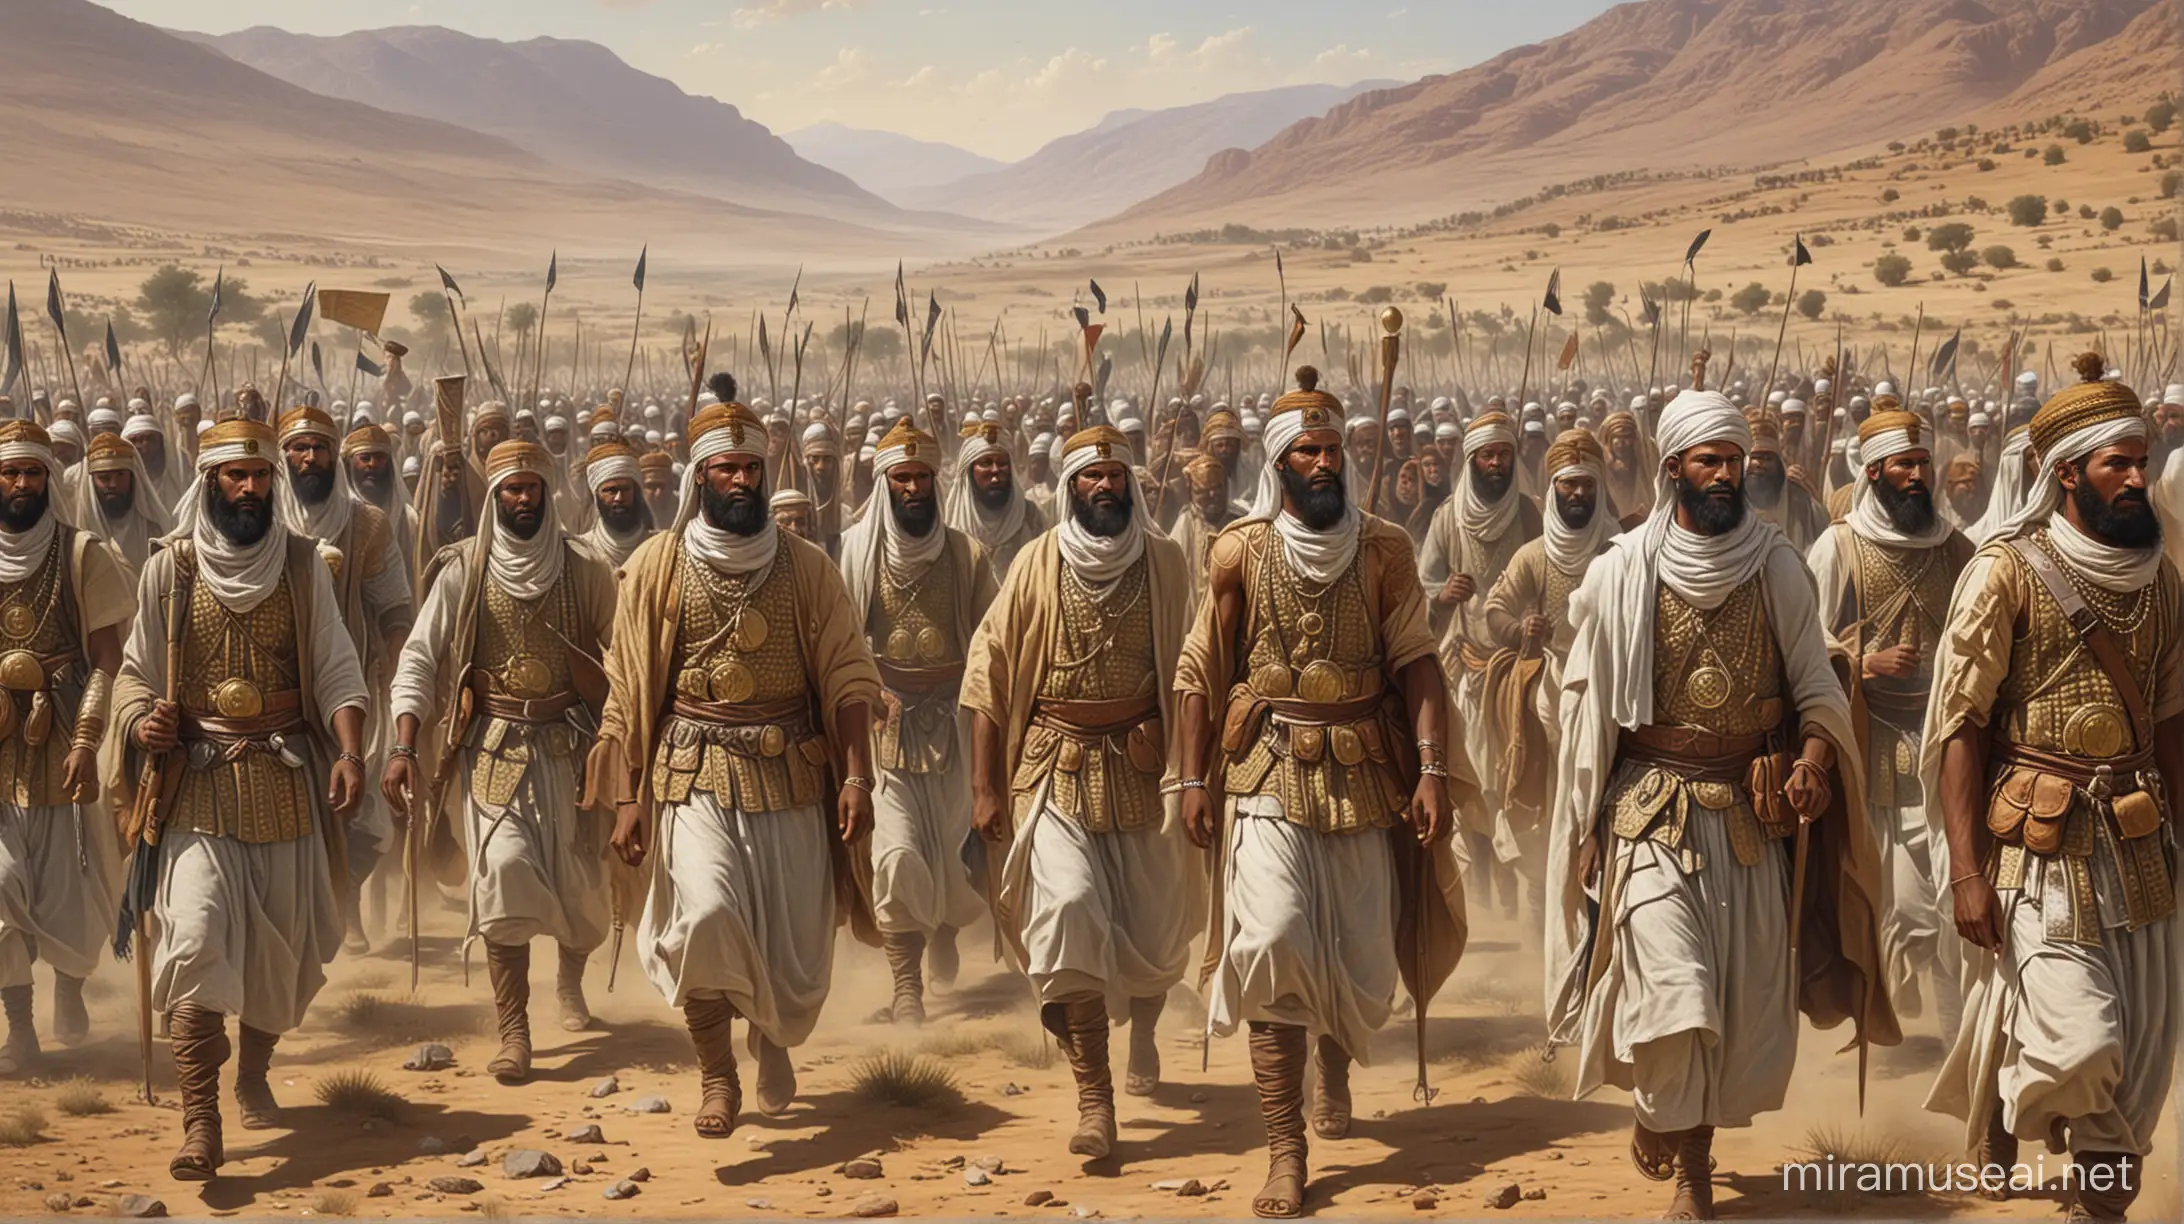 return of muslim warriors from Abyssinia after the khyber battle and Sharing of war booty among them like gold, silver.